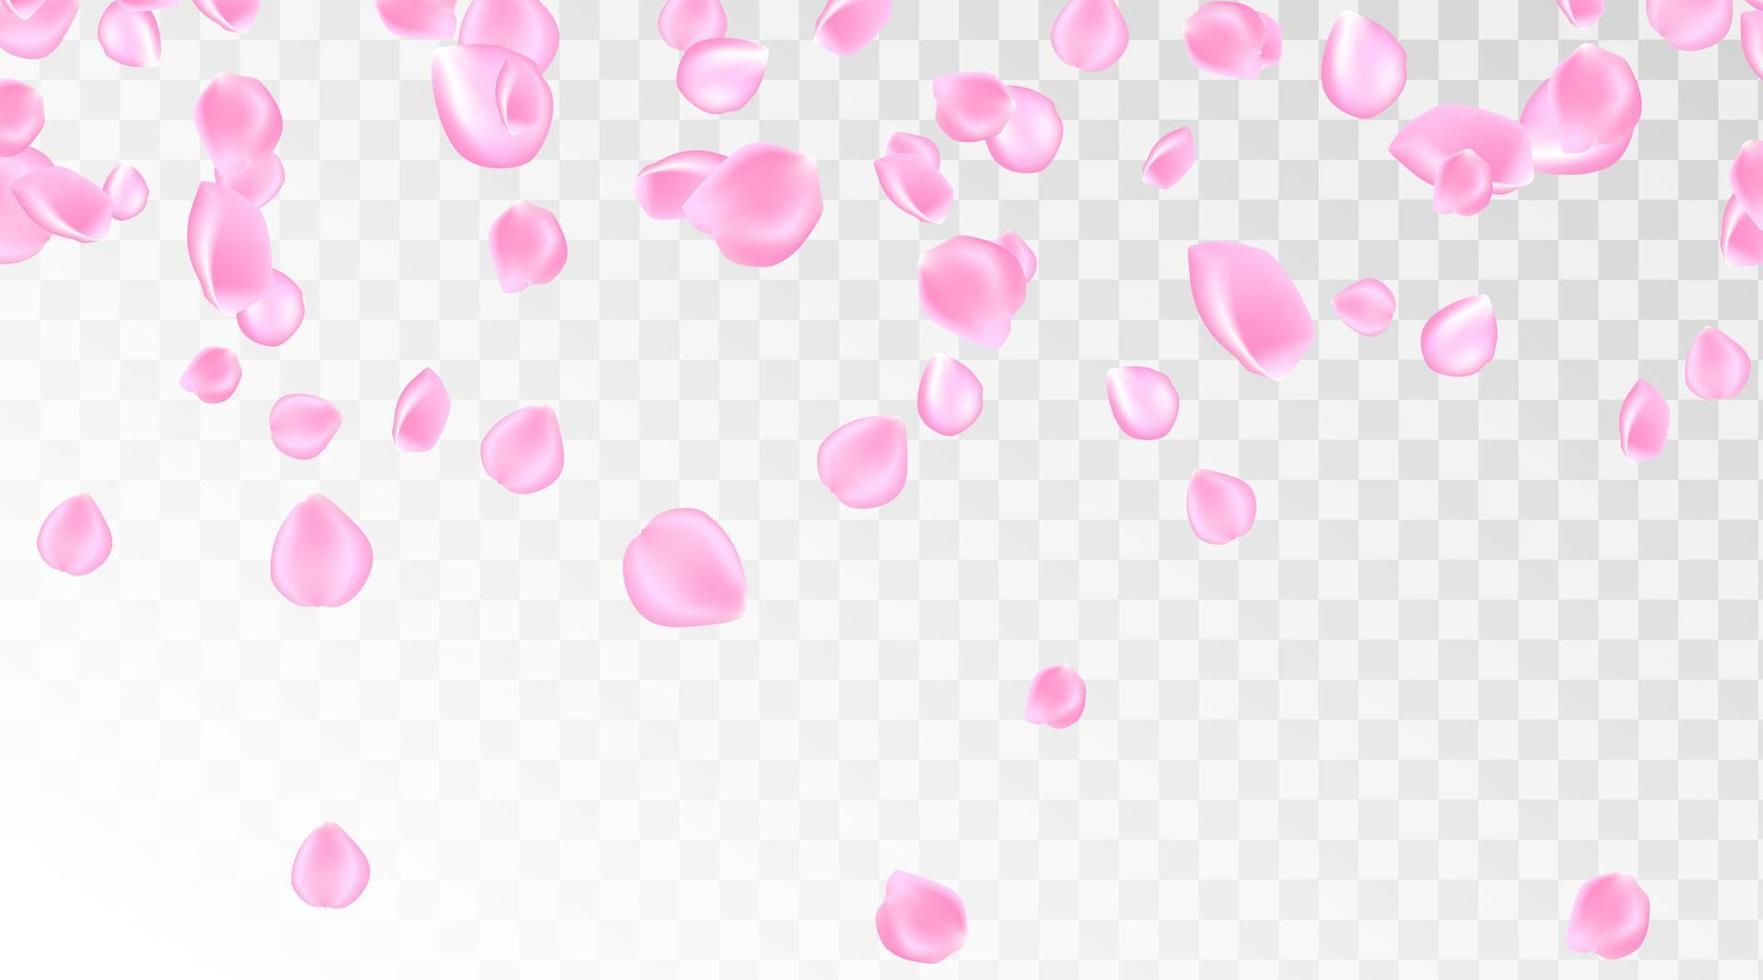 Pink rose petal falling background. Confetti with petals. Vector eps 10.